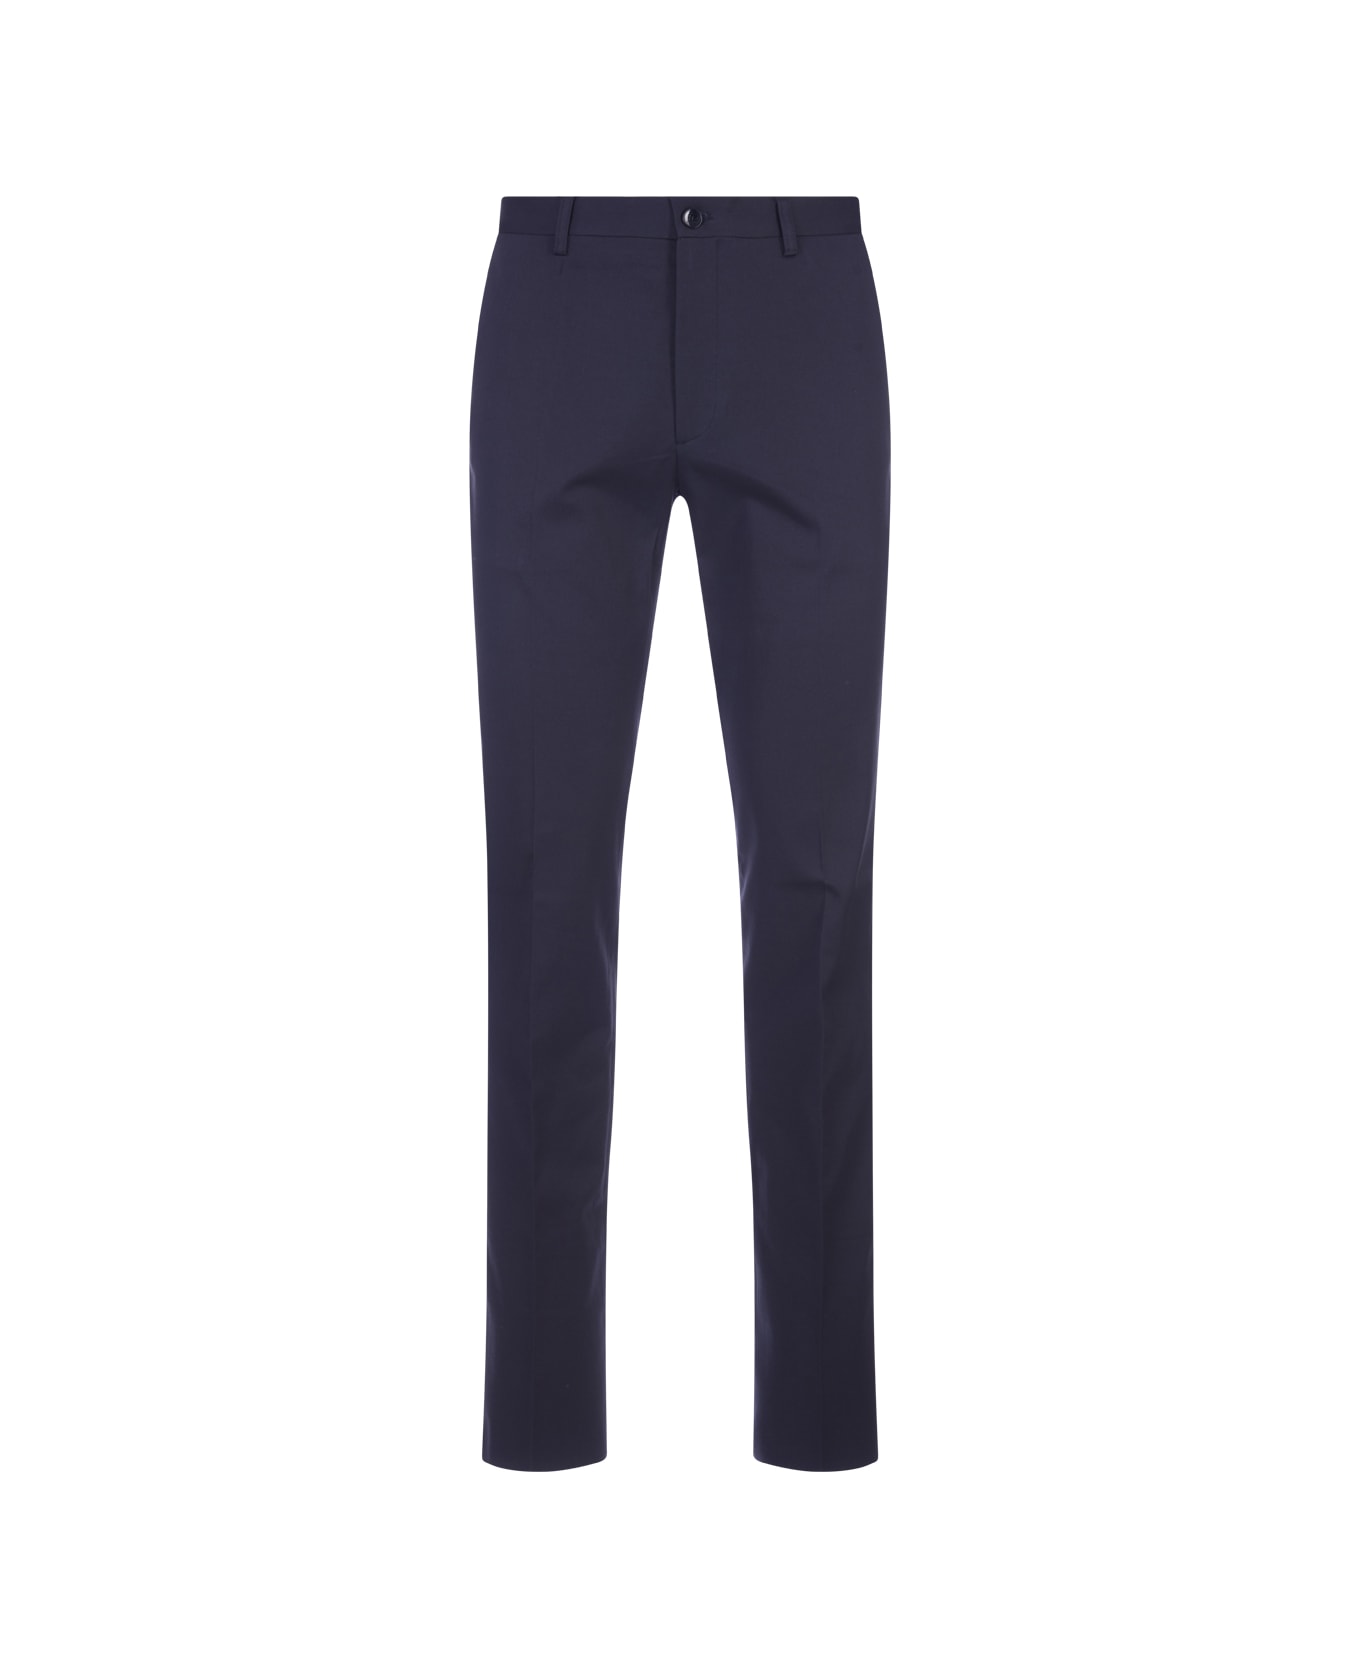 Etro Classic Trousers In Navy Blue Stretch Cotton ボトムス